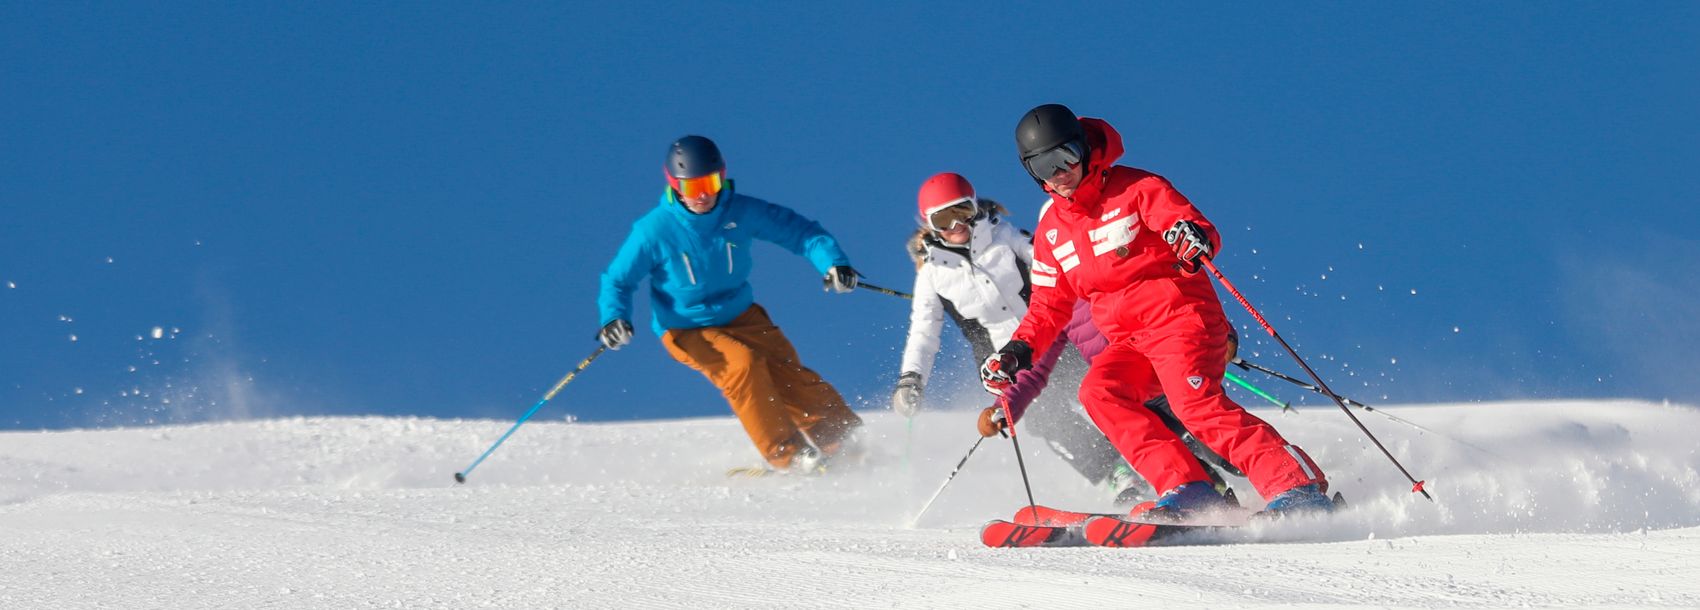 Ski lessons all levels - esf Arc 1600